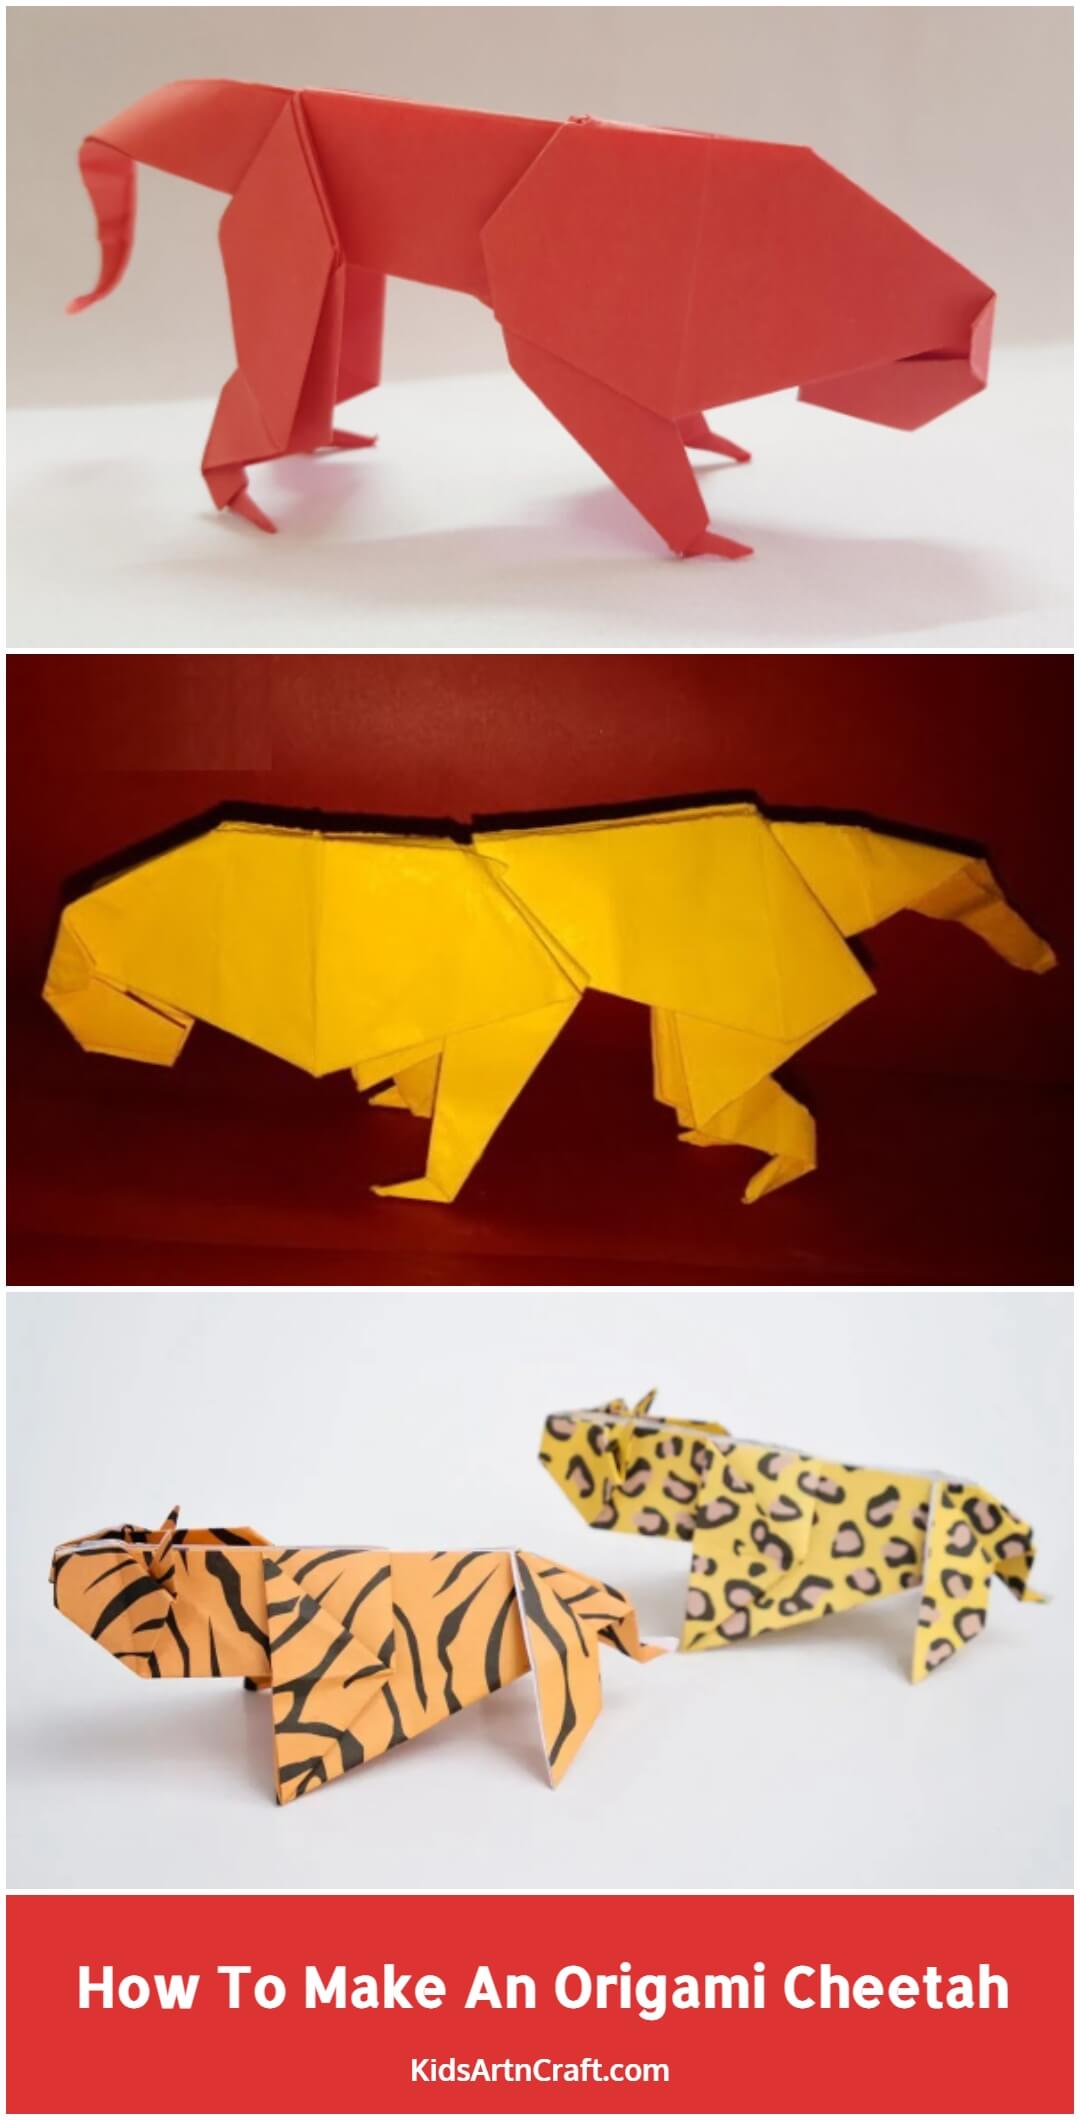 How To Make An Origami Cheetah With Kids